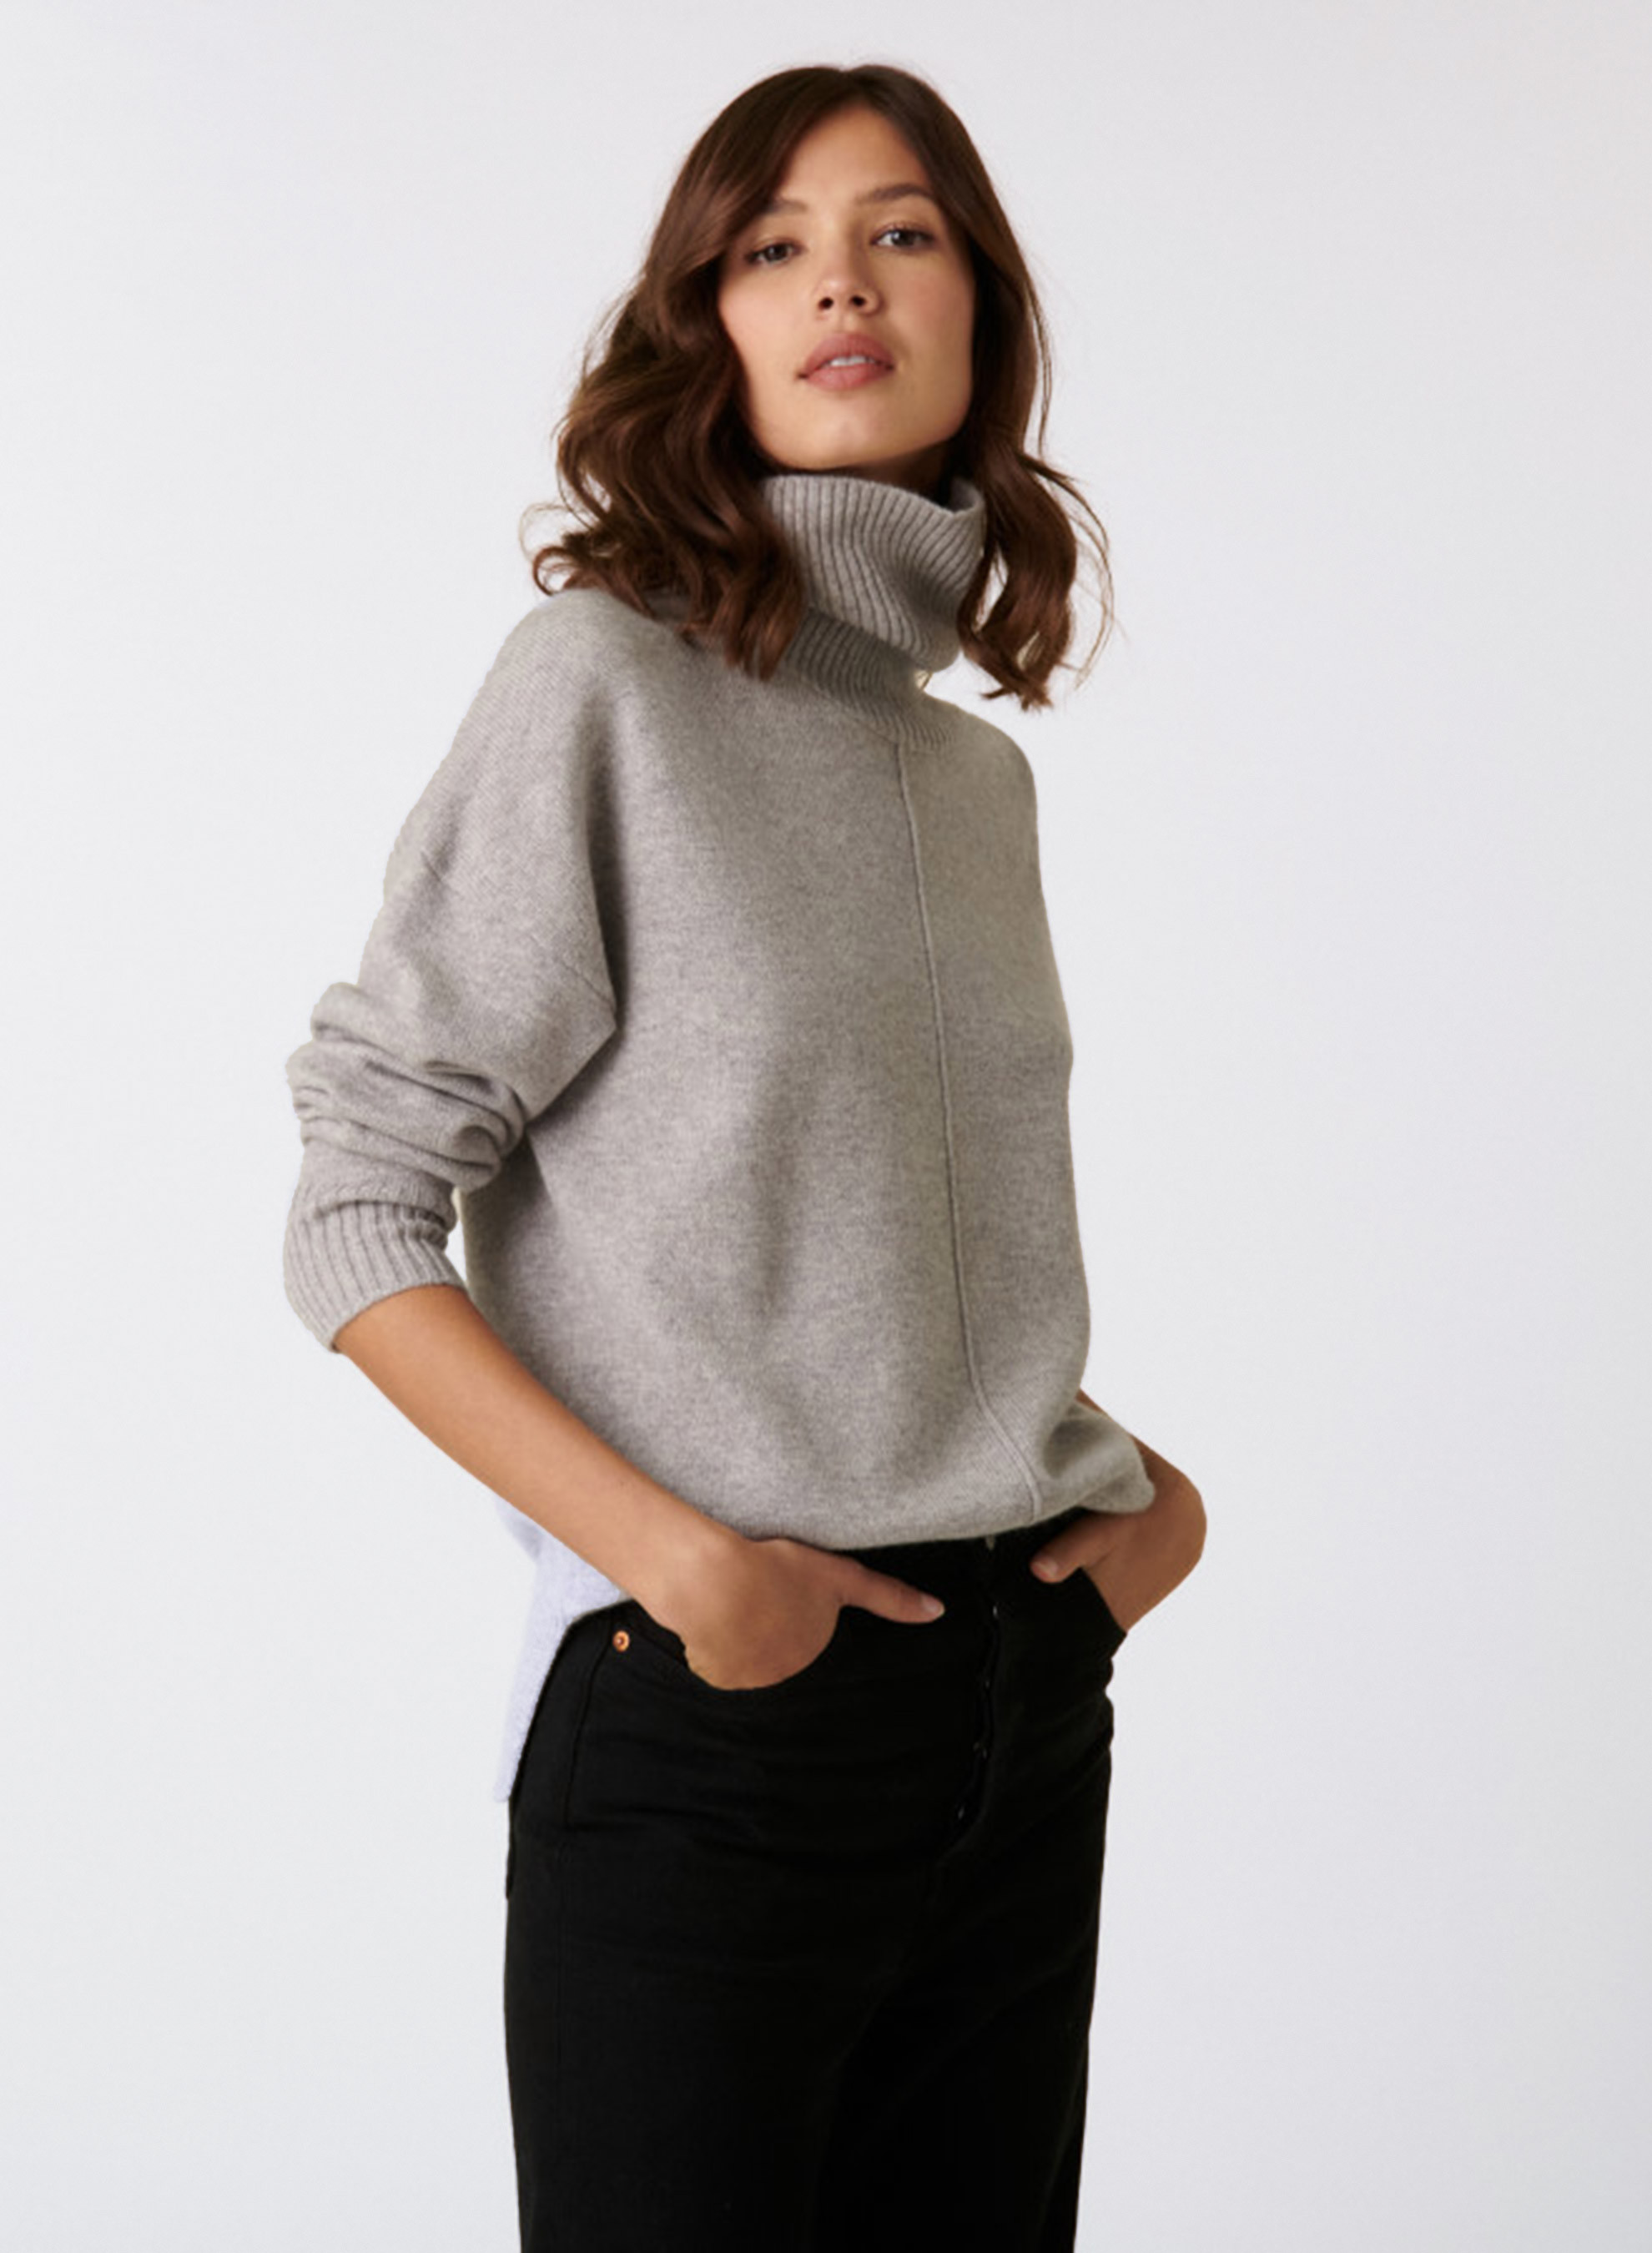 Women's Cashmere Turtleneck Sweaters, Free Delivery